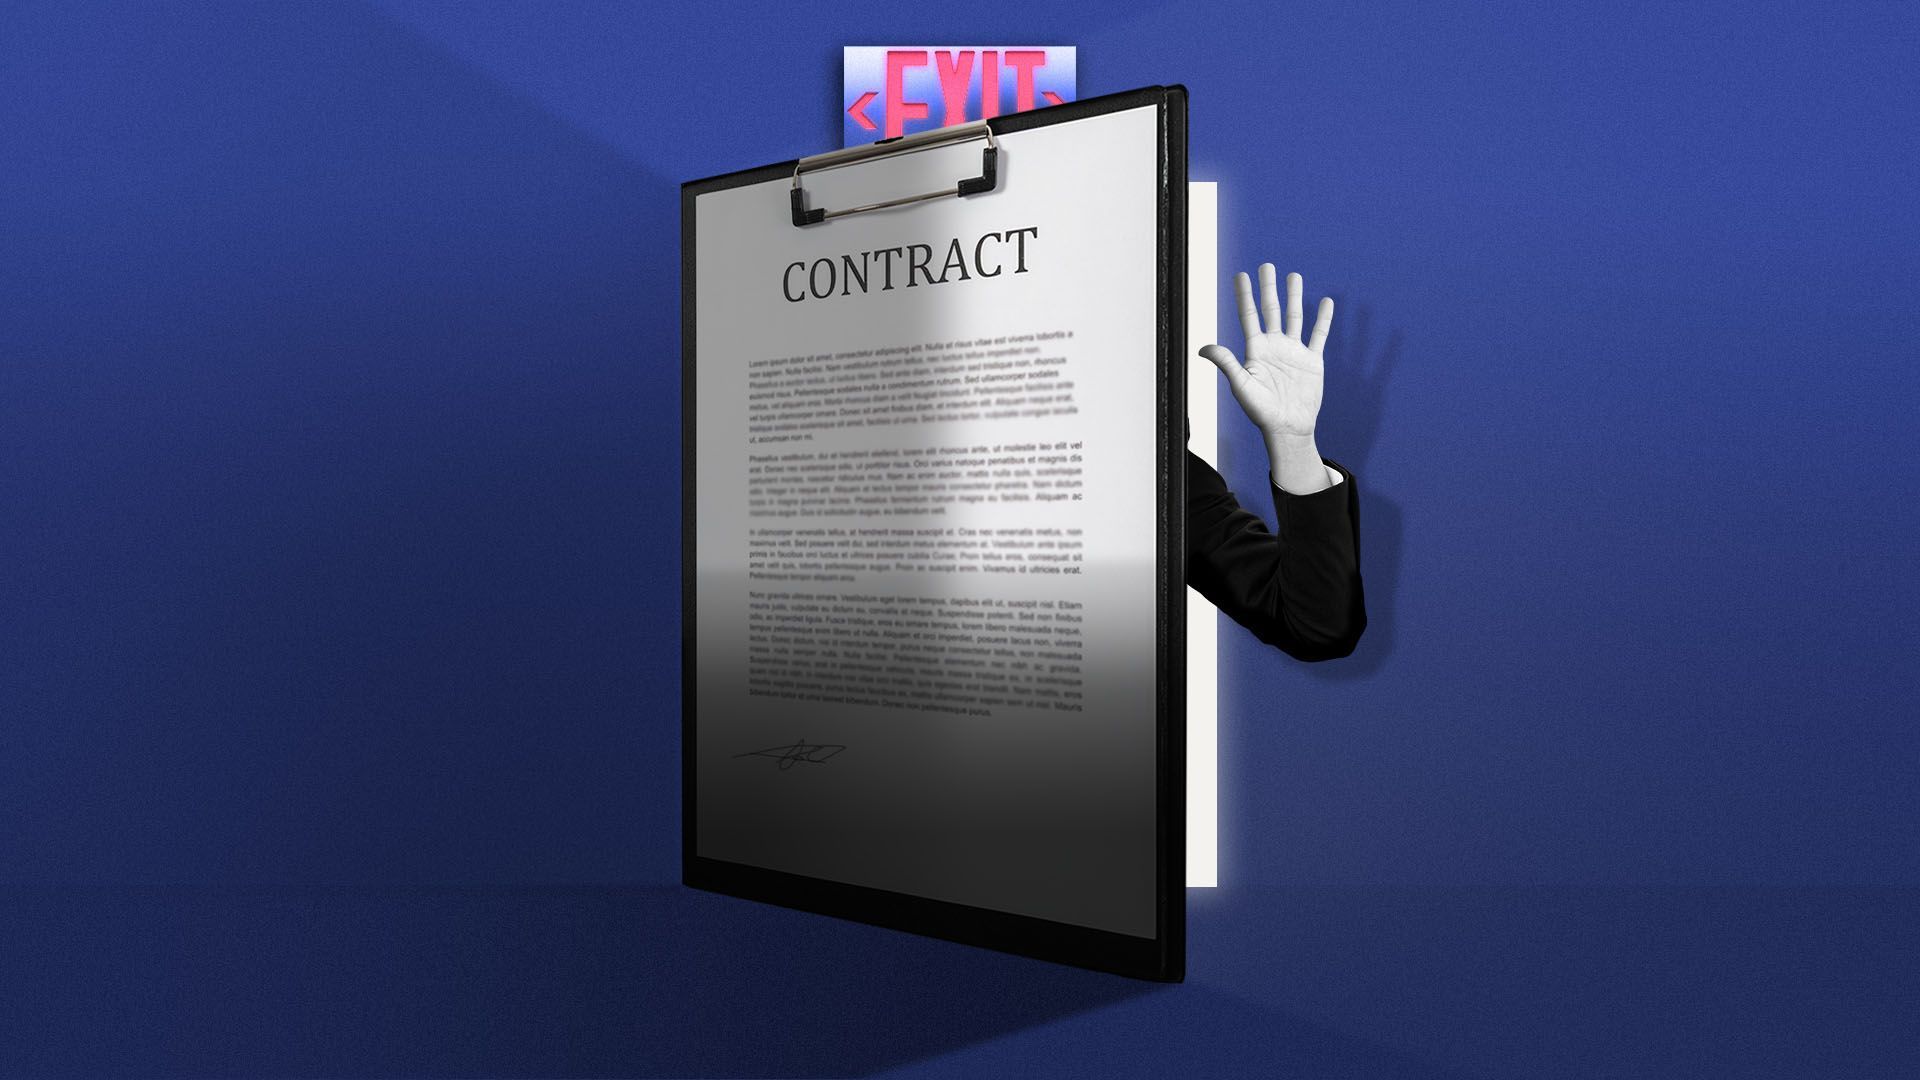 Illustration of a contract as an exit door with someone waving goodbye behind it